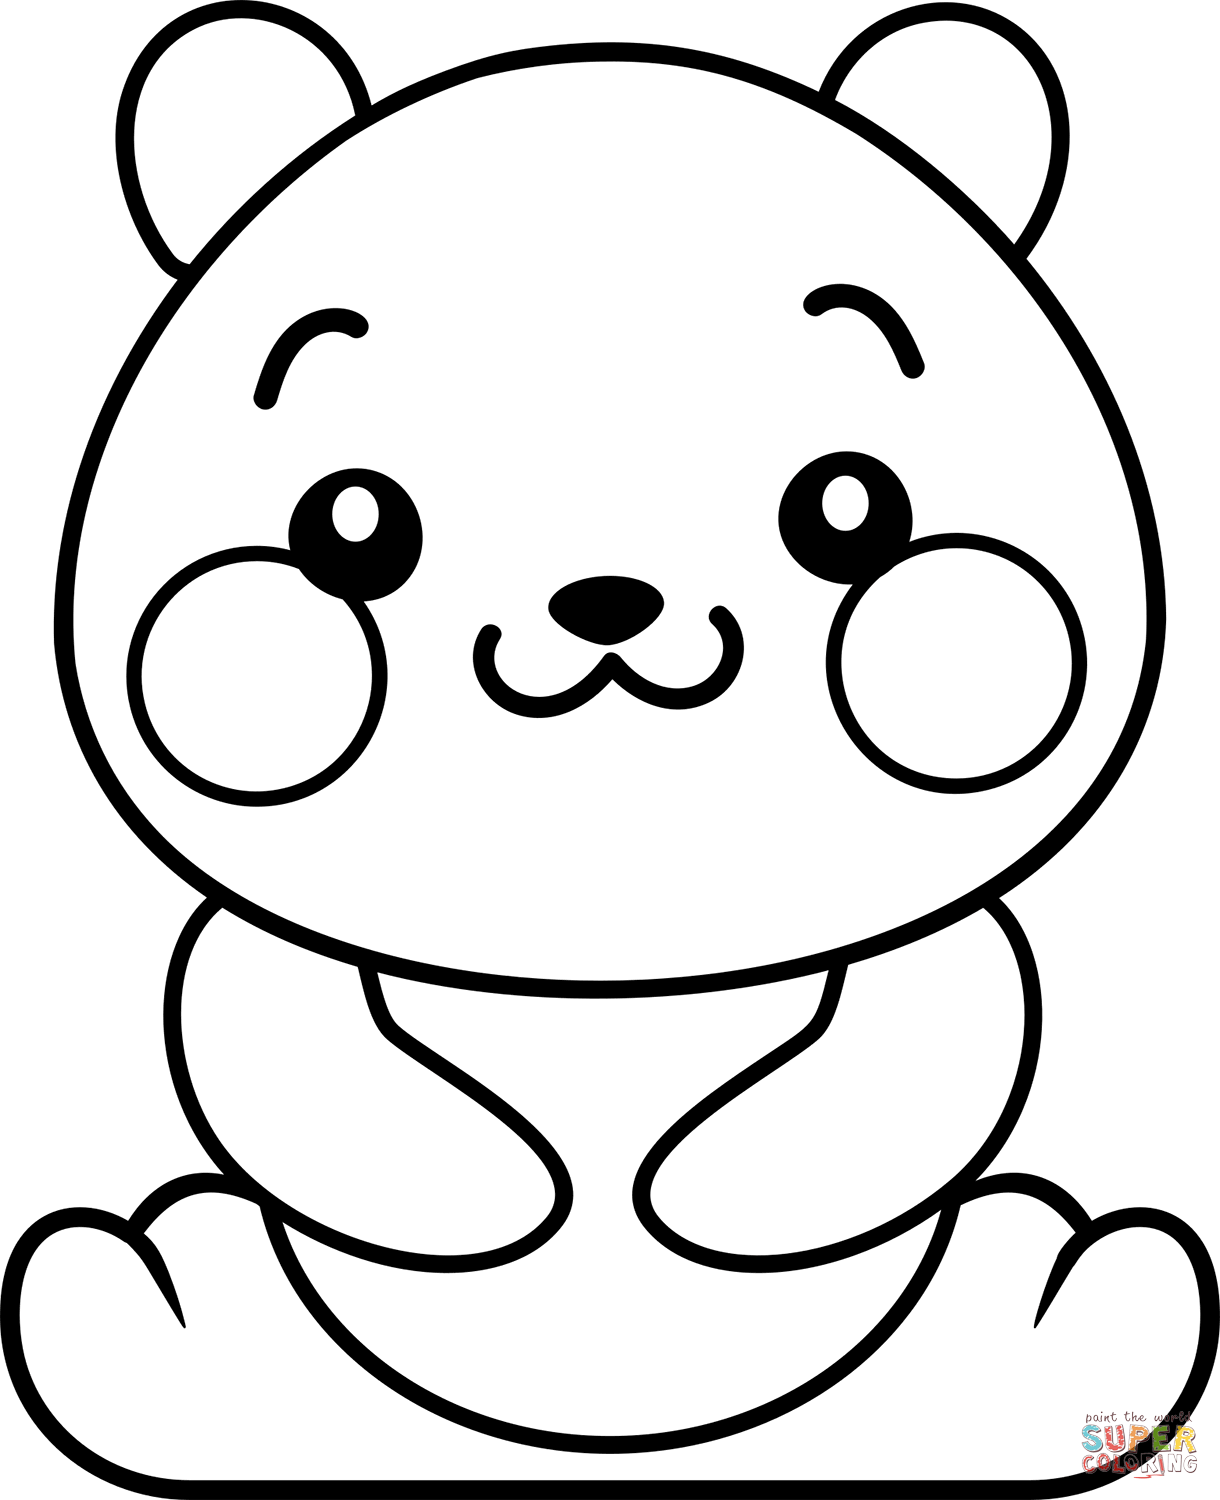 Cute Panda coloring page | Free Printable Coloring Pages